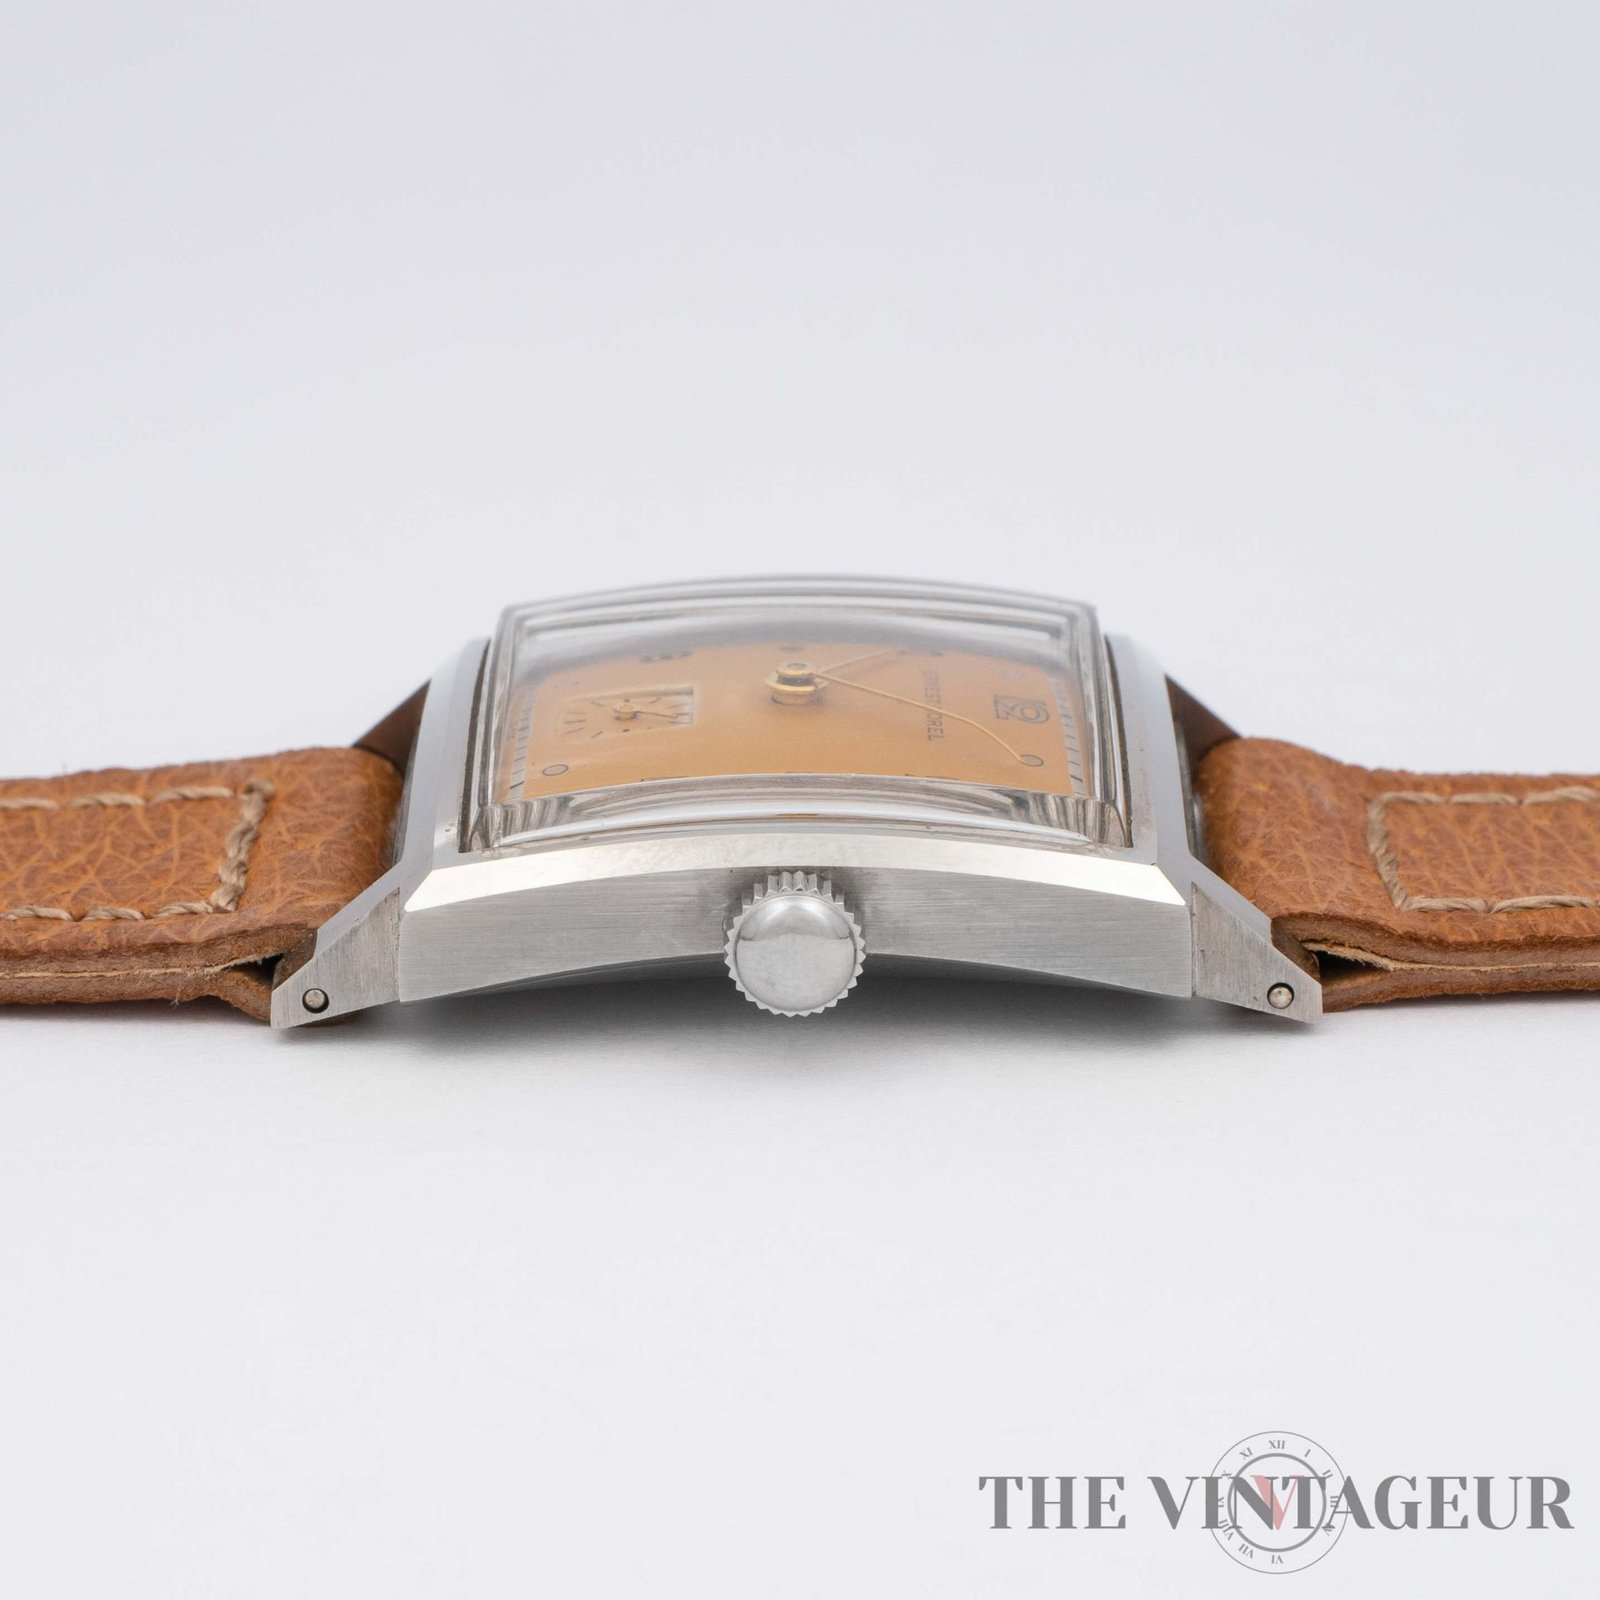 Ernest - Borel - The Vintageur - Your bespoke watches collection - Collectible - watches- and - more